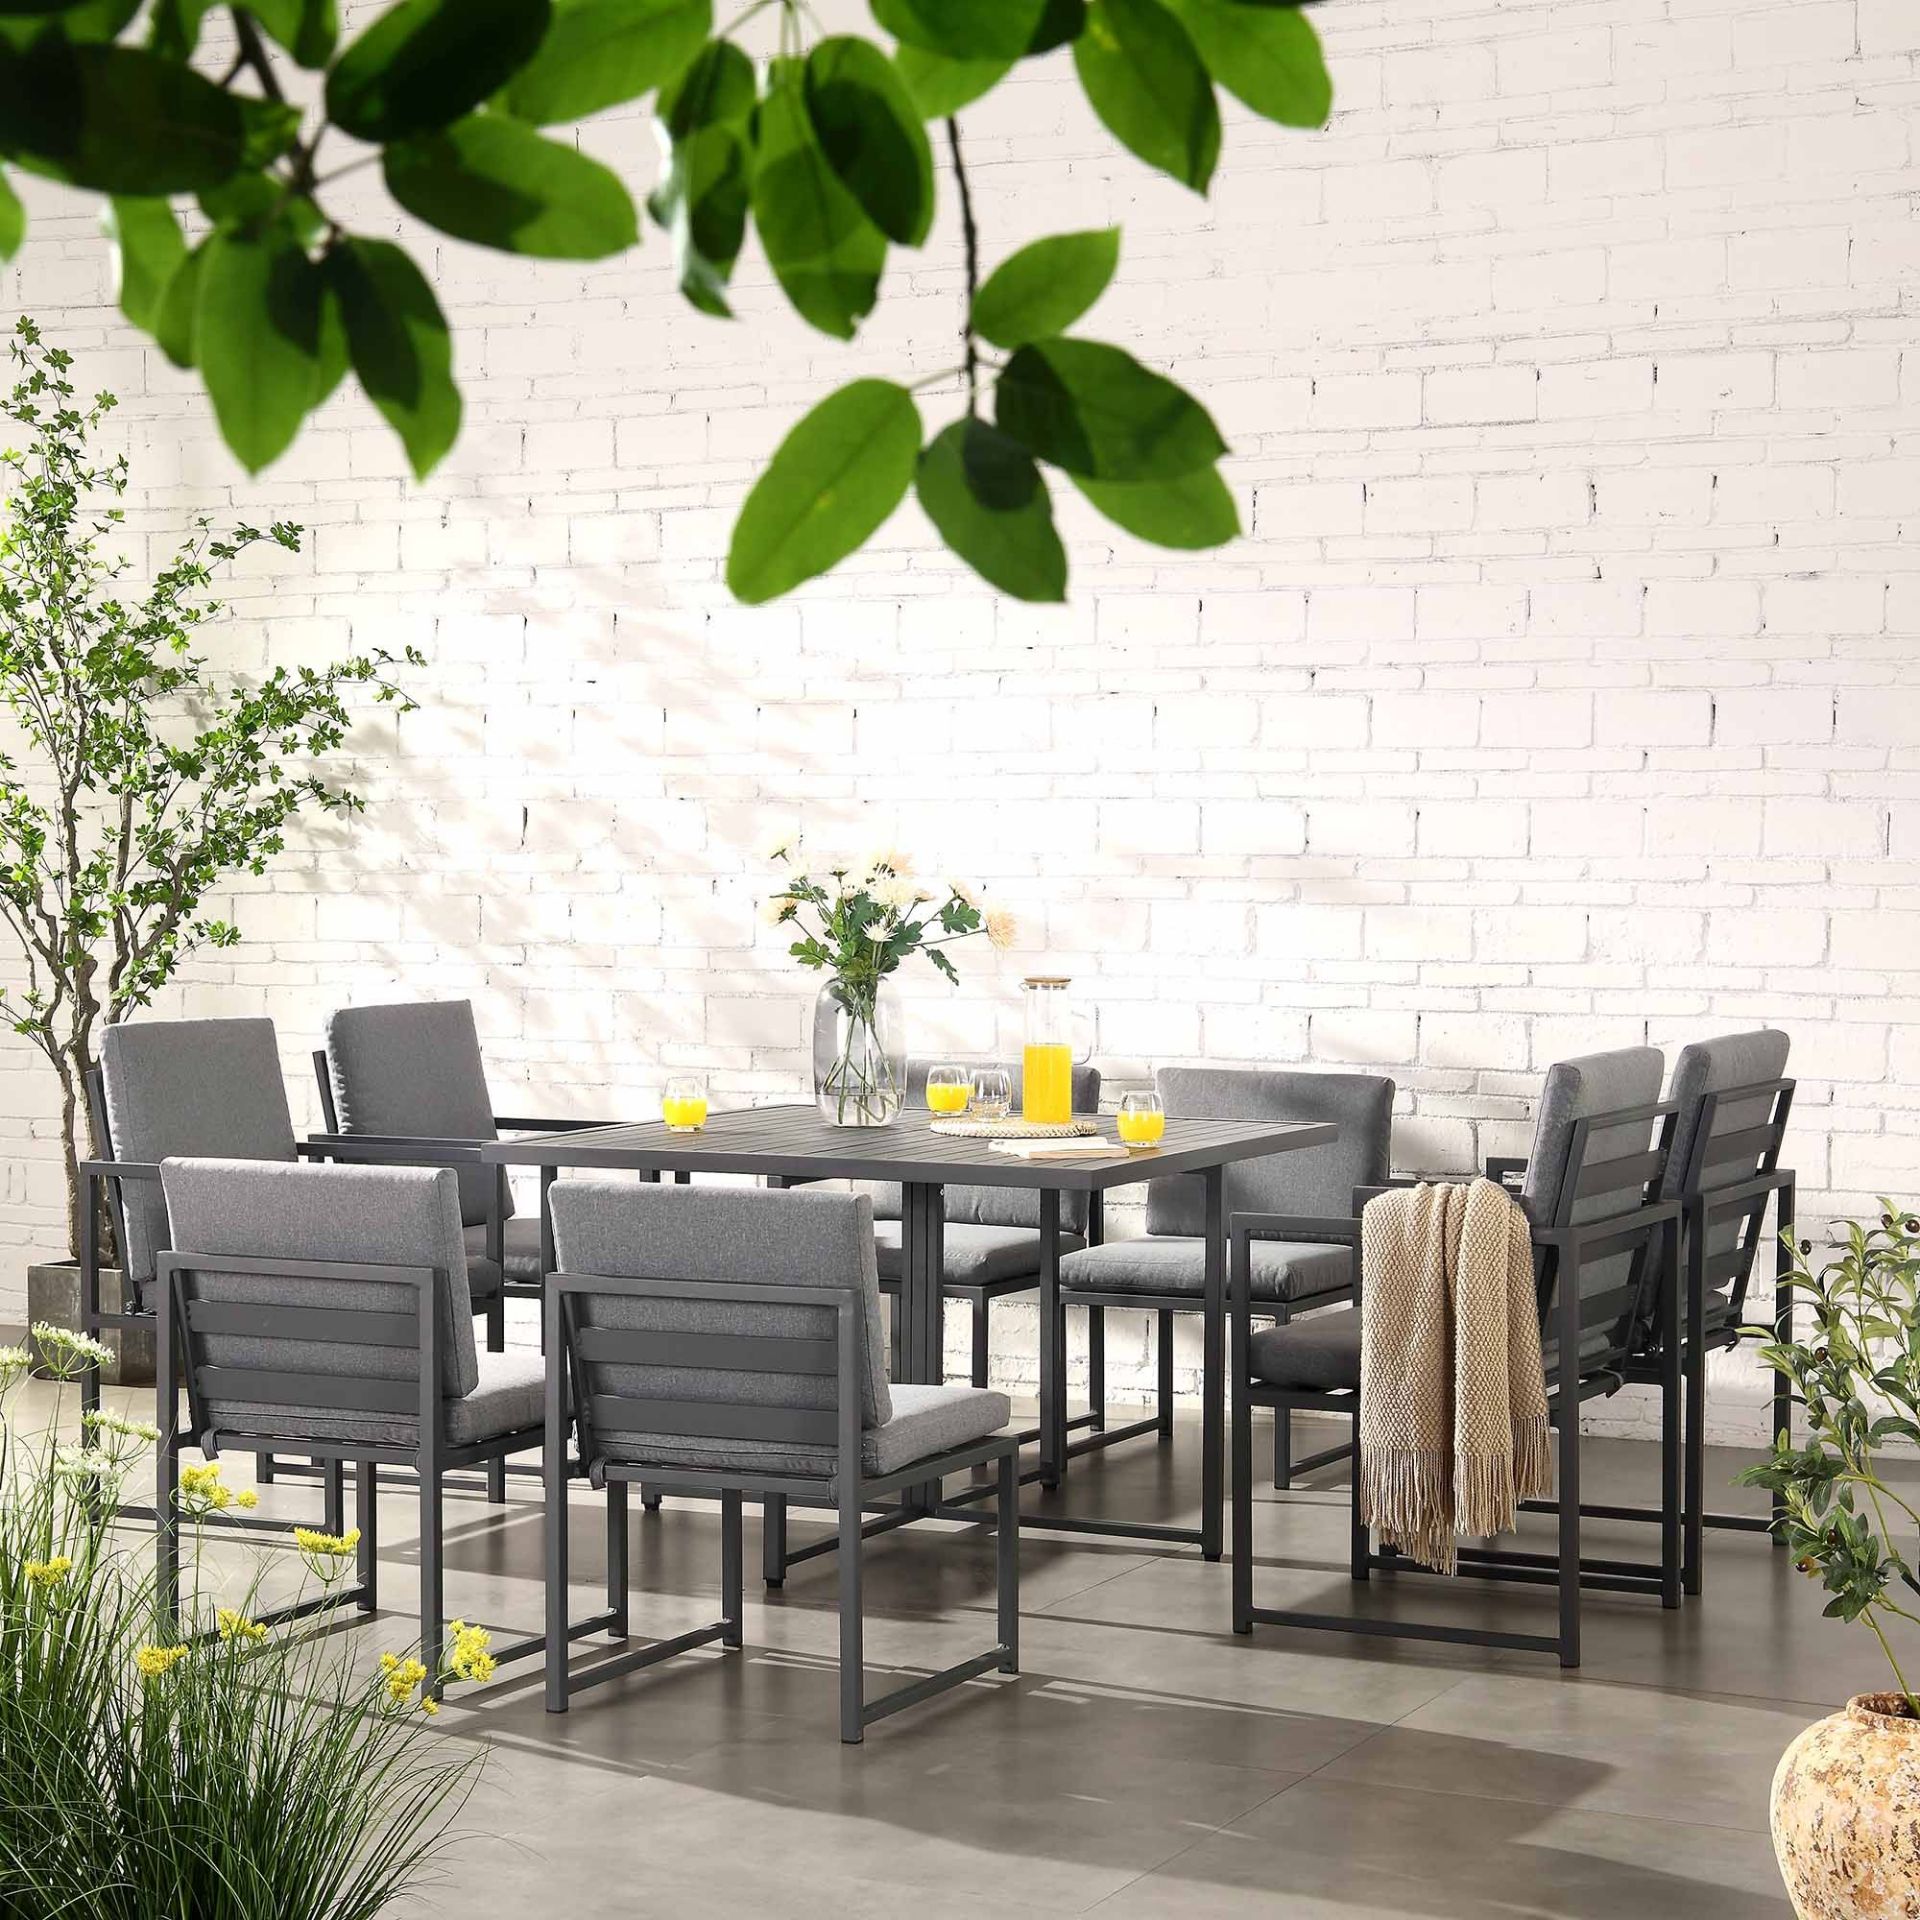 Albany Aluminium 9-Piece Outdoor Cube Dining Set, Grey. - R14BW. RPR £1,399.00. Comprising of a bold